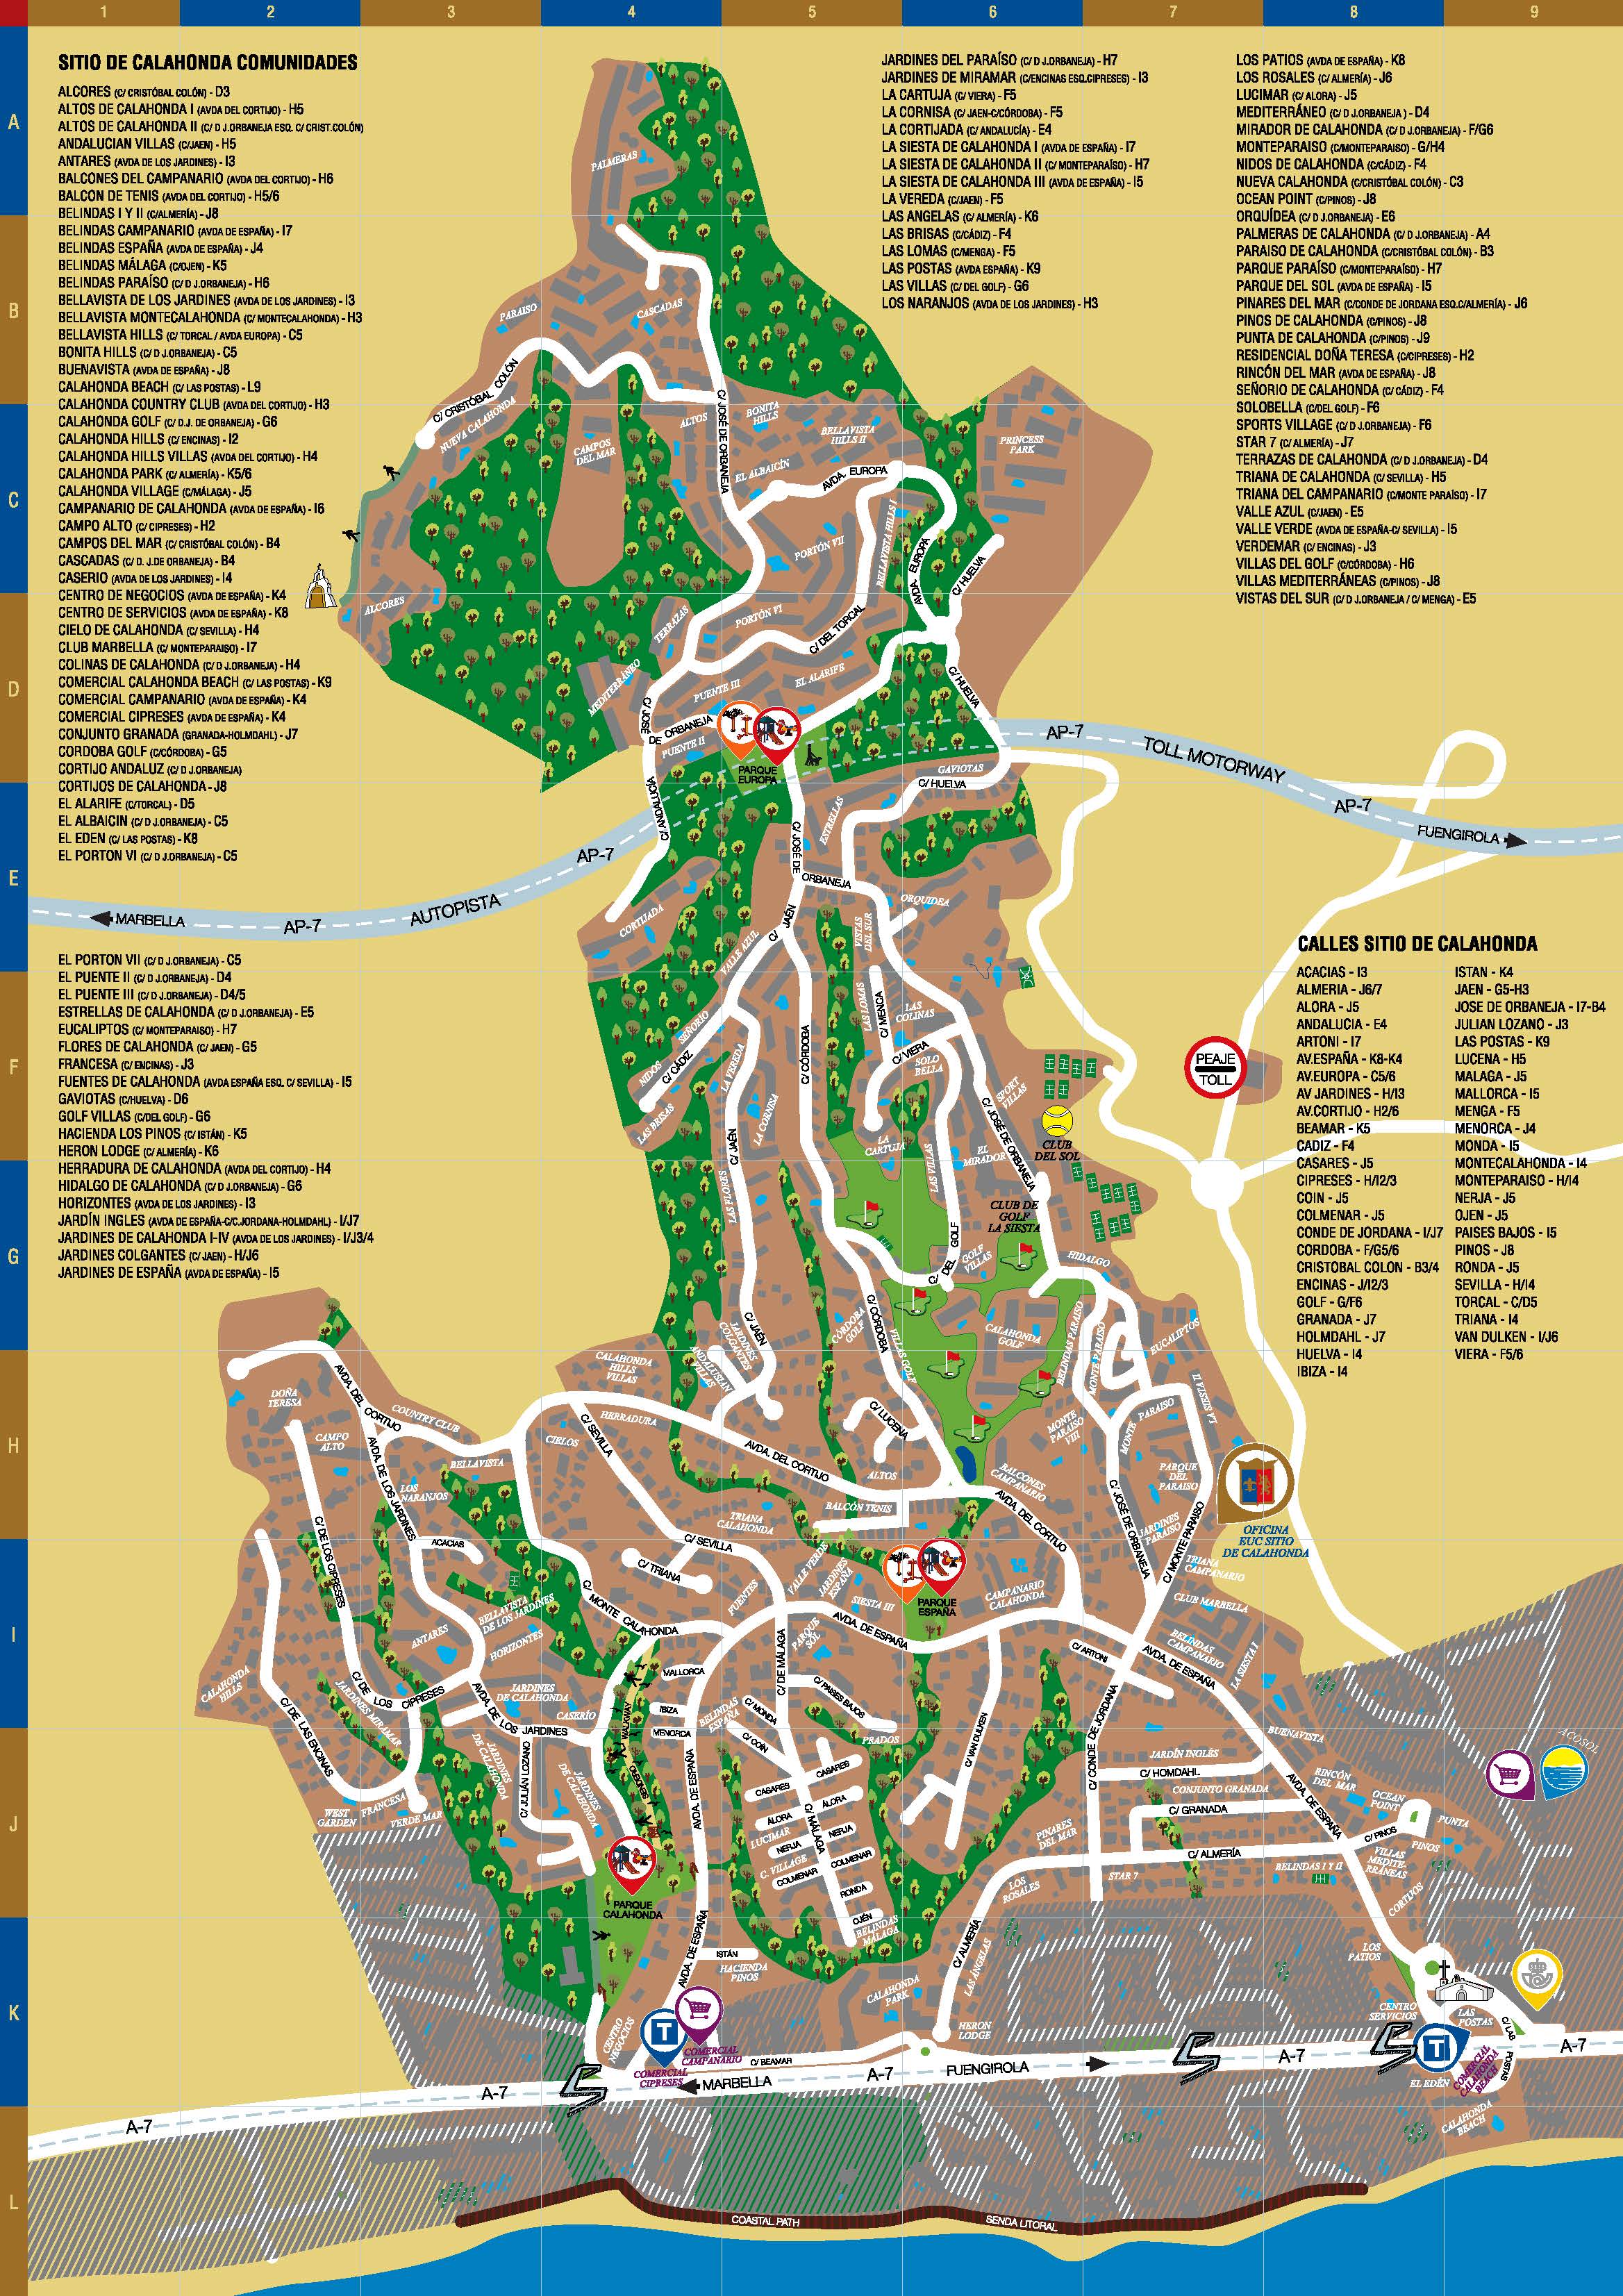 Map of Sitio de Calahonda including all the areas and communities that form it